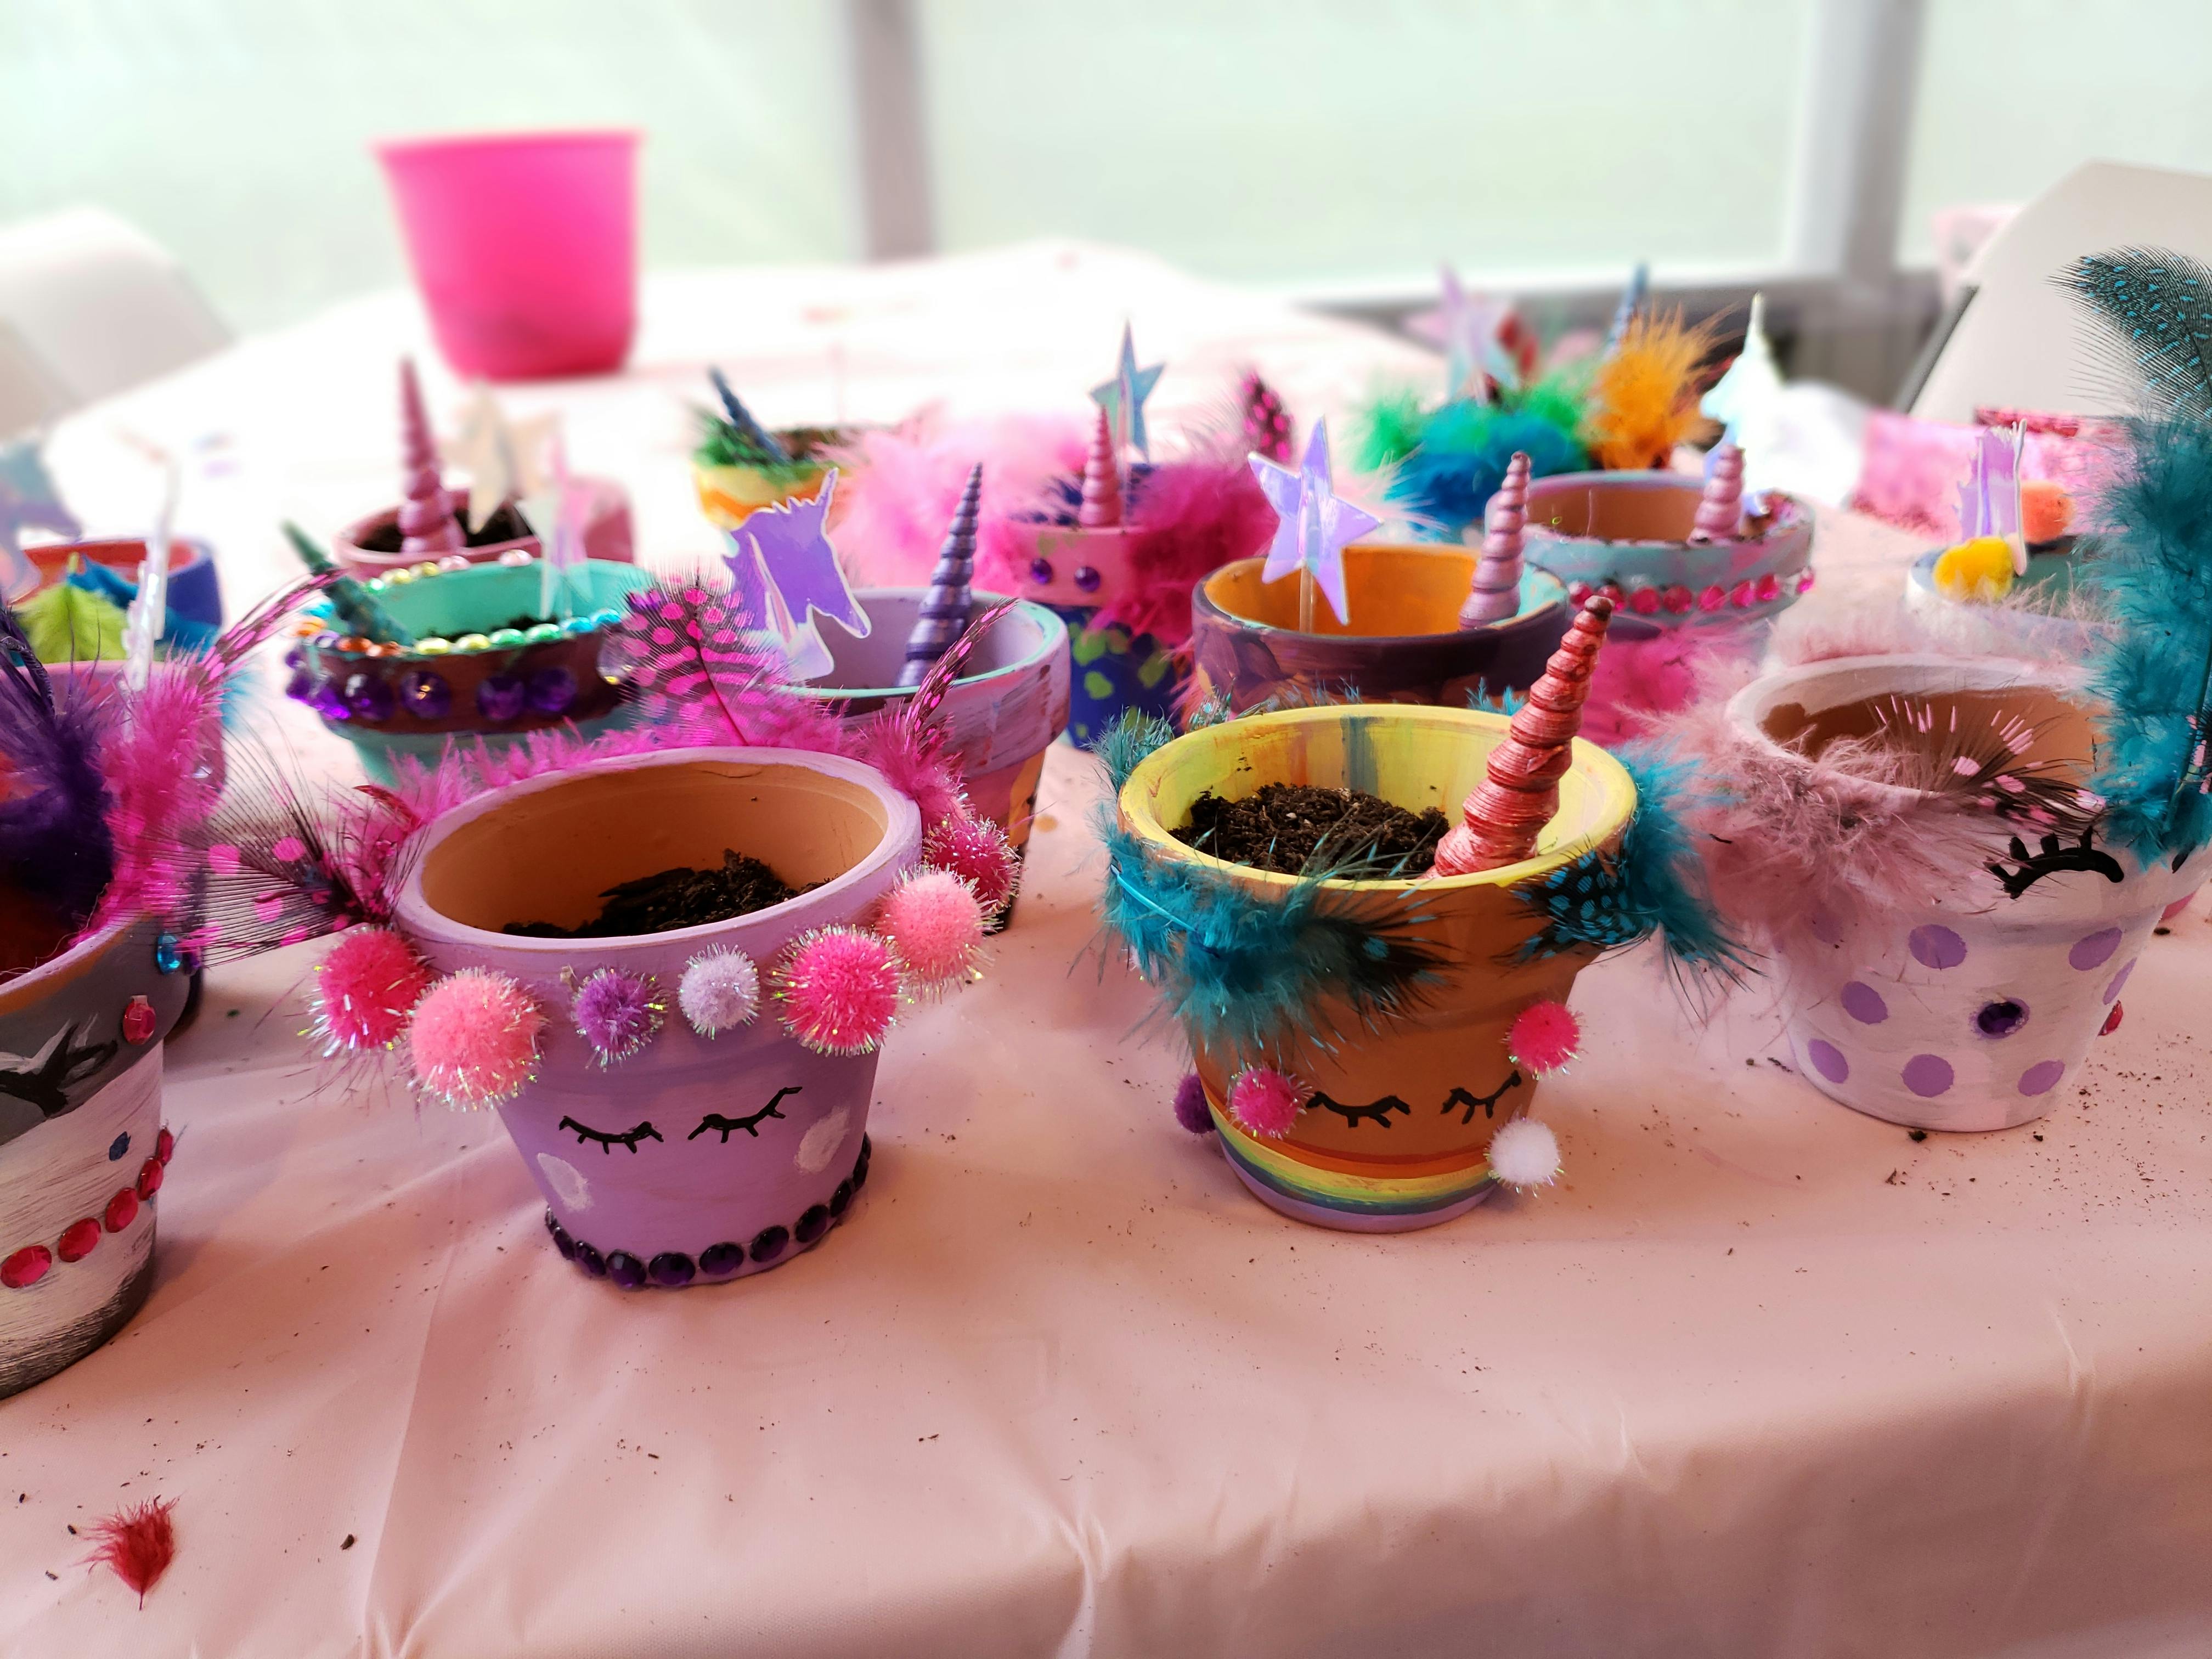 Free stock photo of art party, arts and crafts, birthday